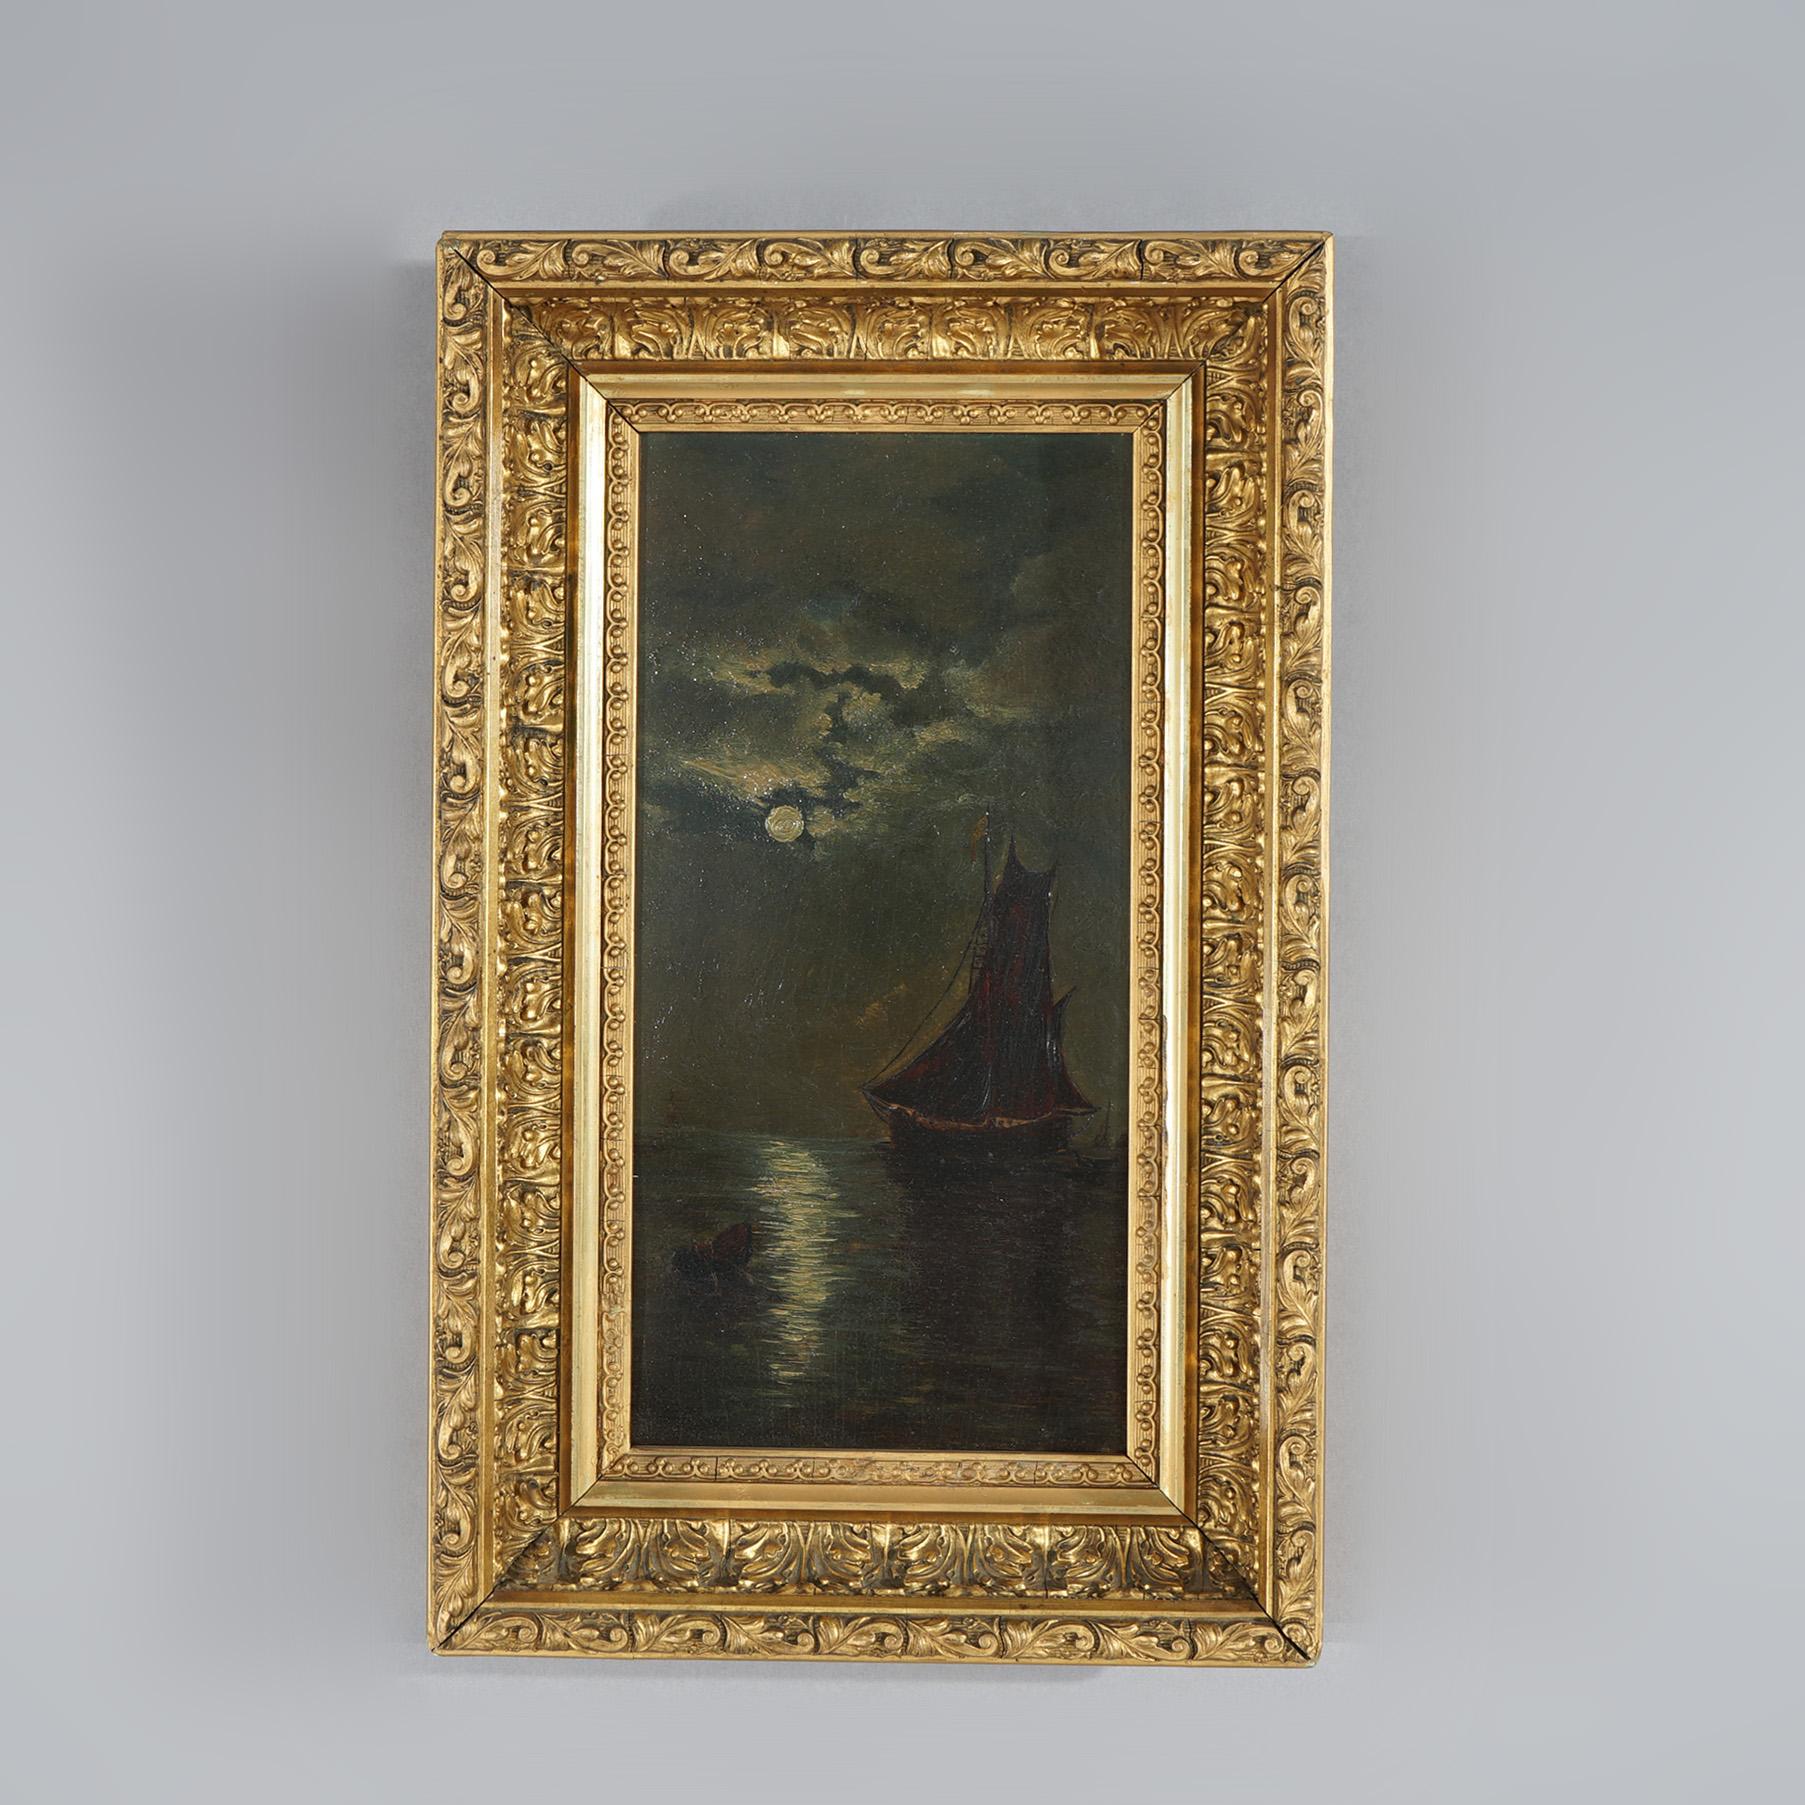 An antique seascape painting offers oil on board sailing ship on moonlit calm seas, 19th century

Measures - 16